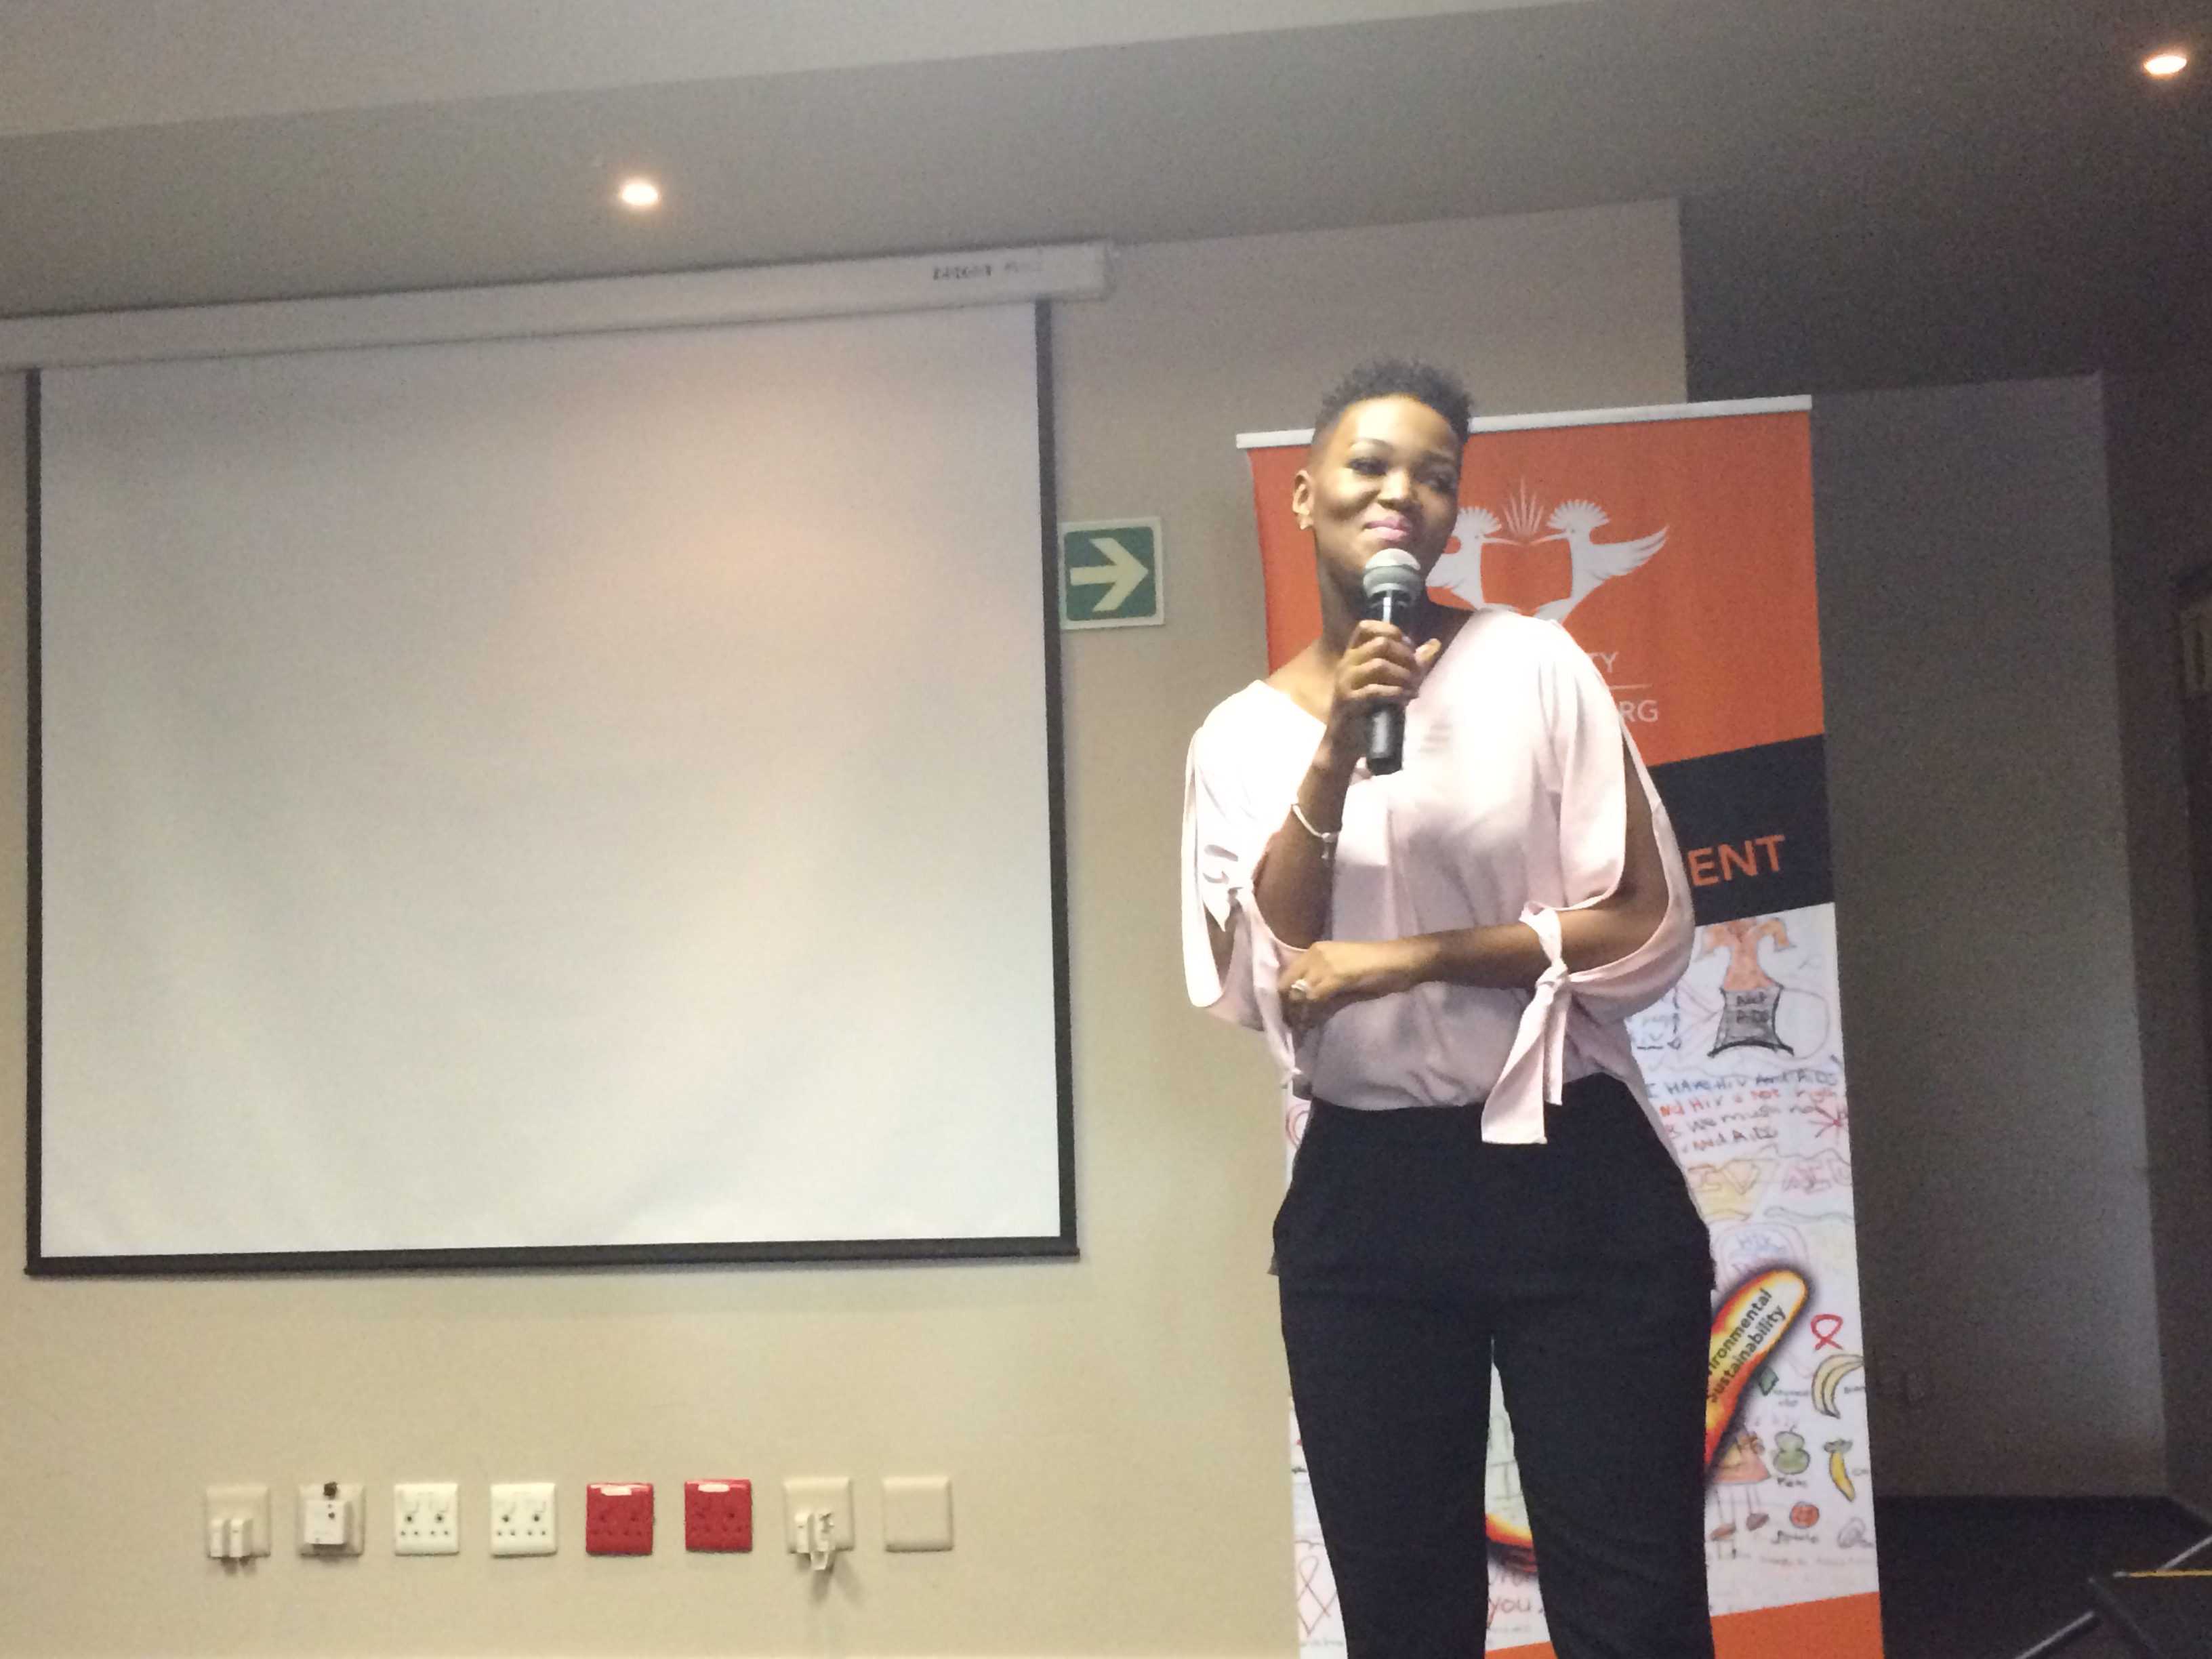 #Onemillionpadscampaign, Bonkang Mantjane, Miss South Africa 2010, speaking at the launch